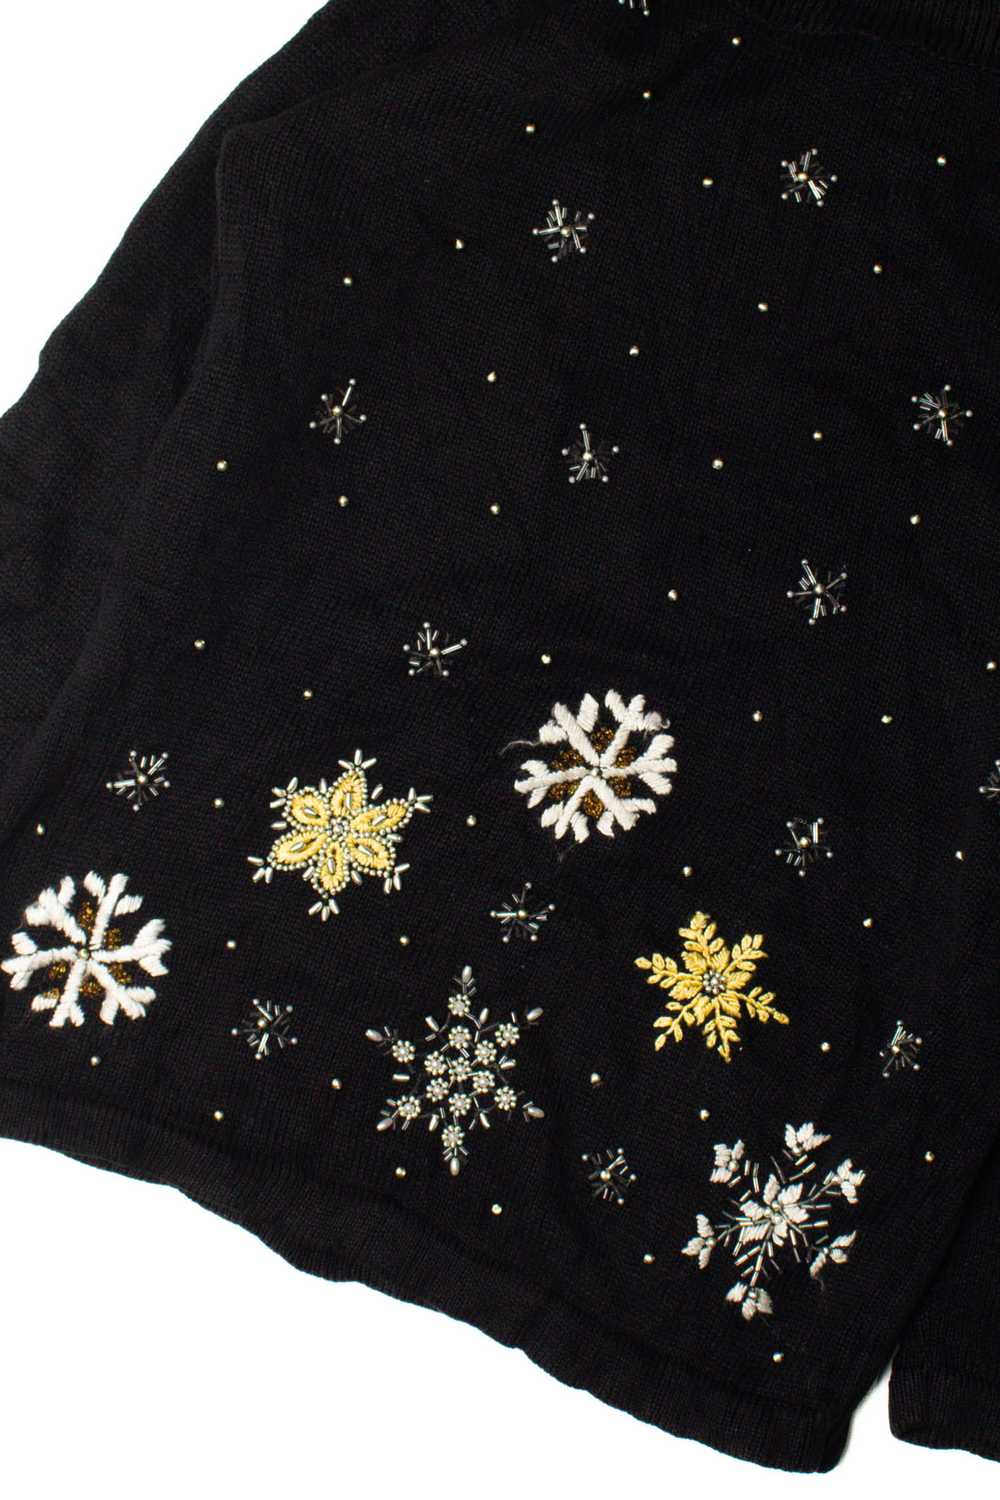 Black Ugly Christmas Pullover 59514 - image 2